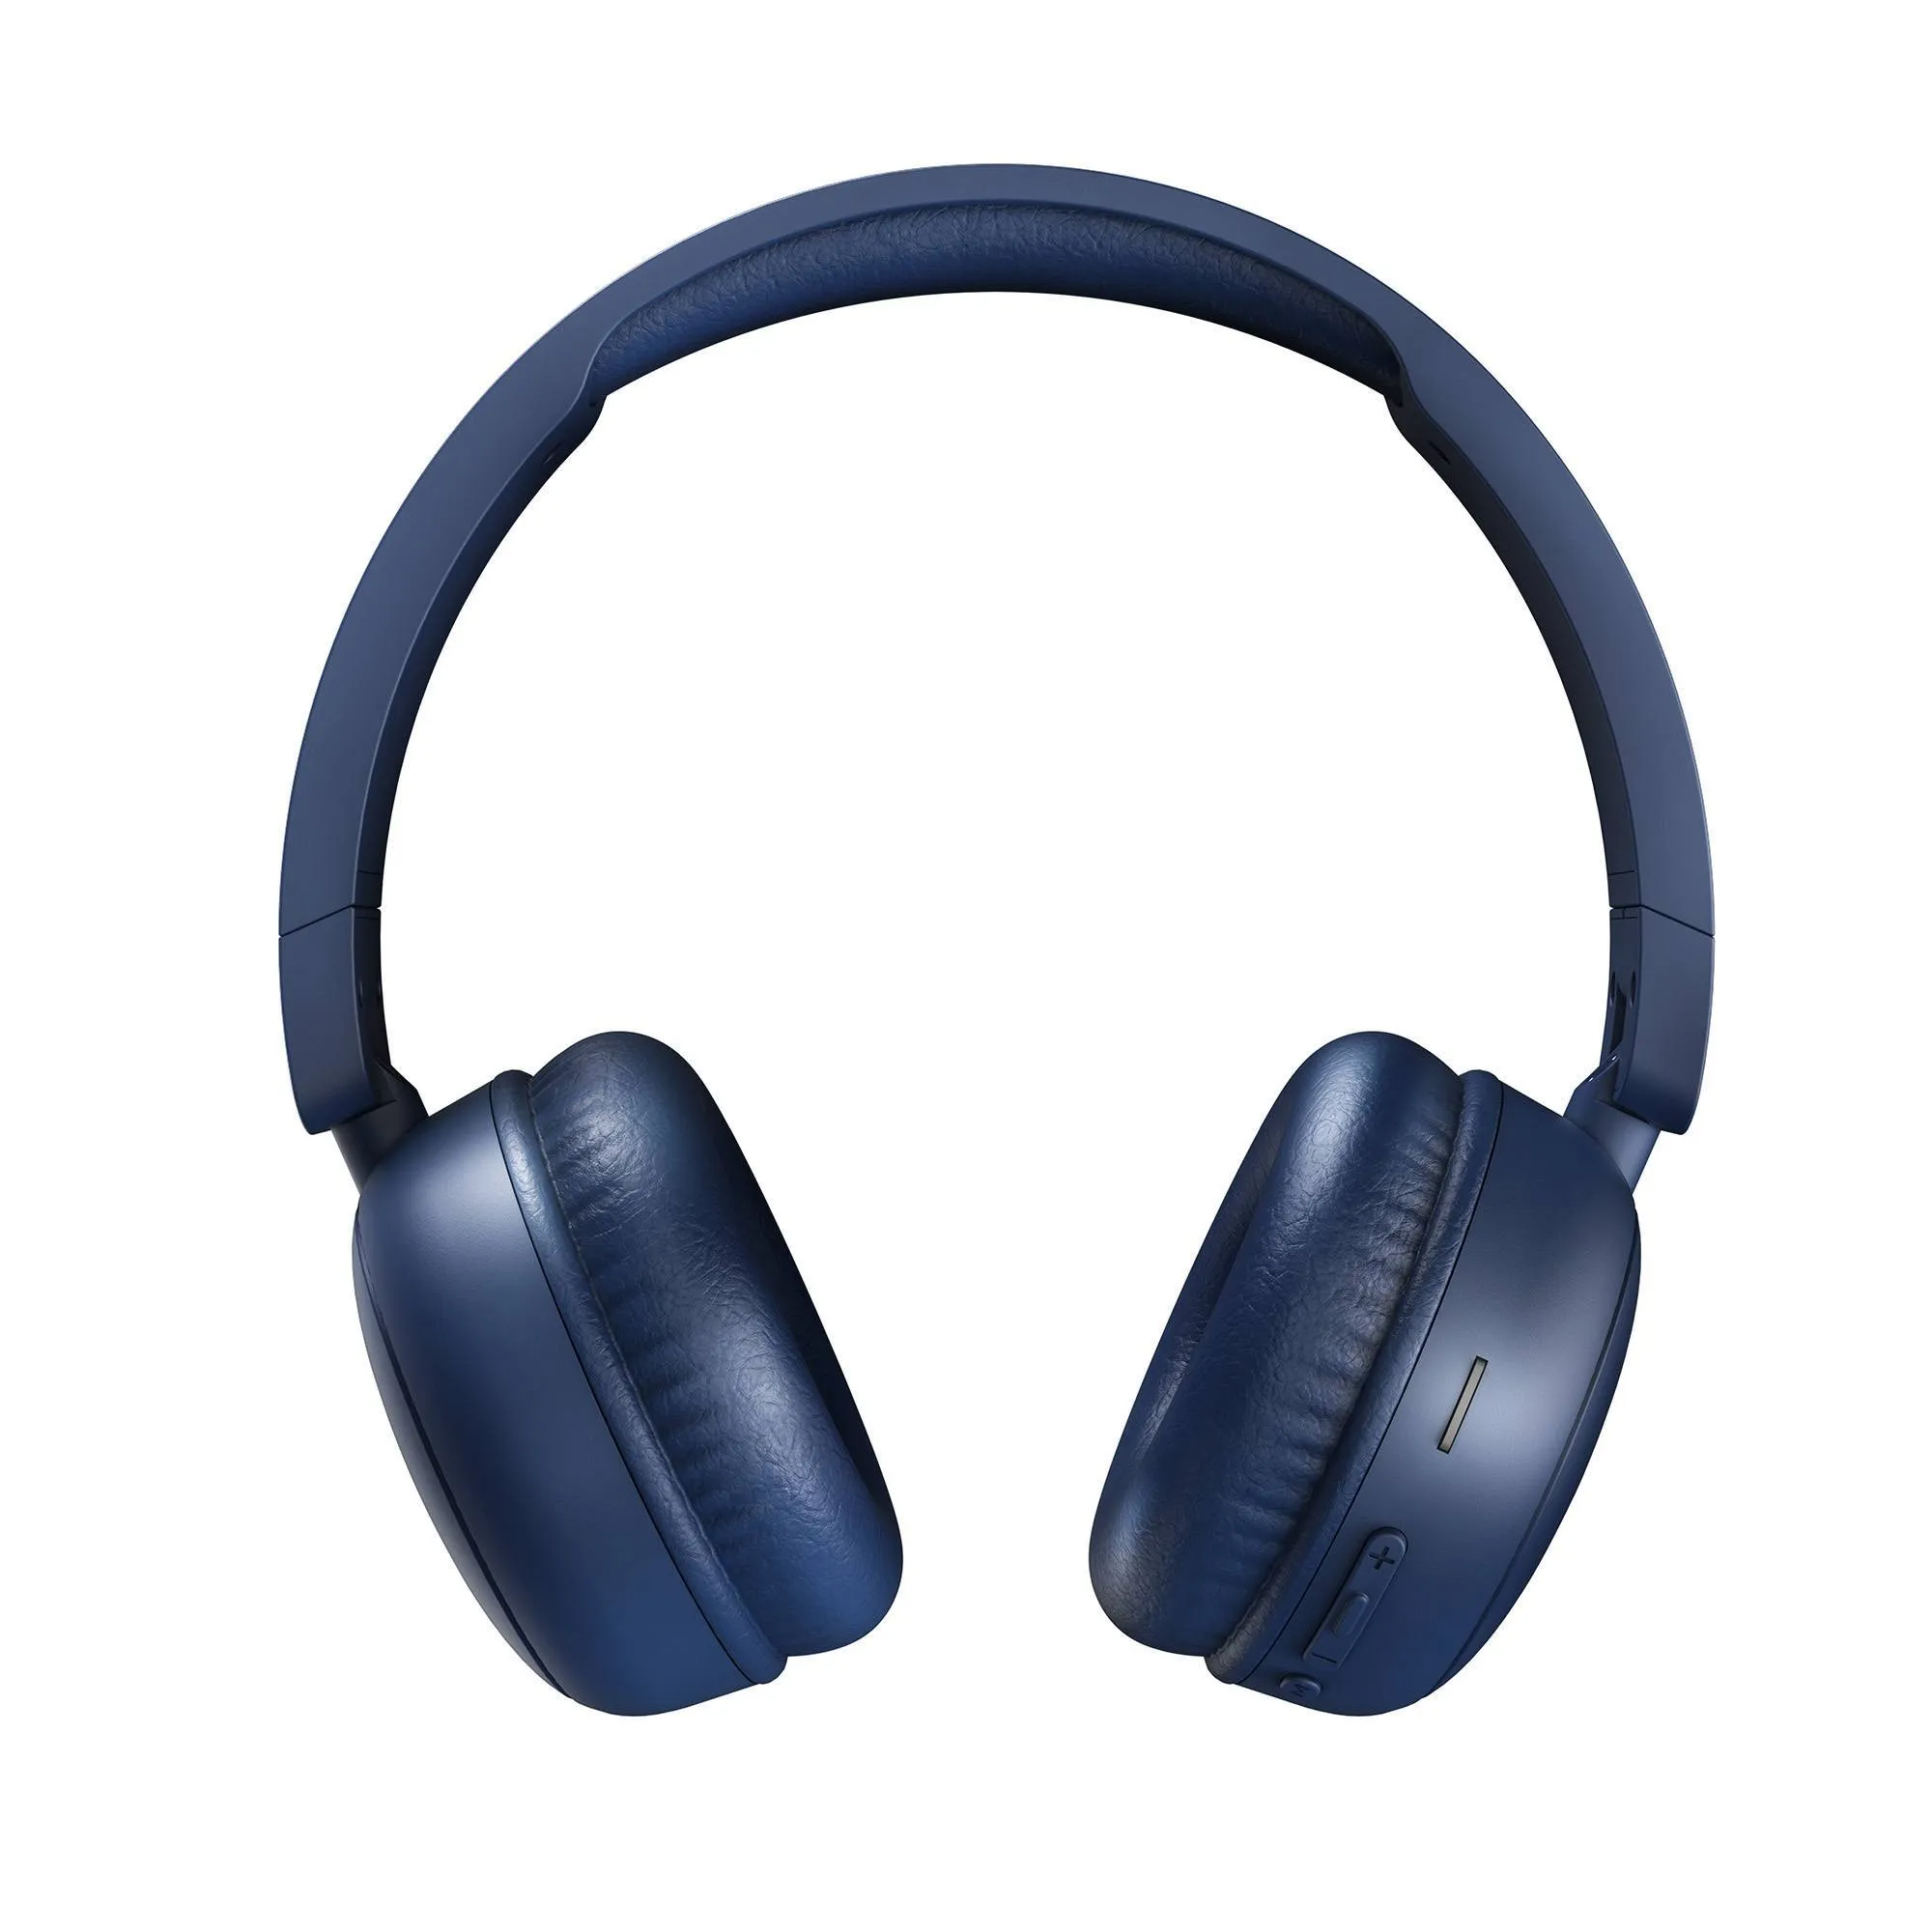 Radio Color indigo headphones with multifunction buttons to answer calls and control playback without using your phone